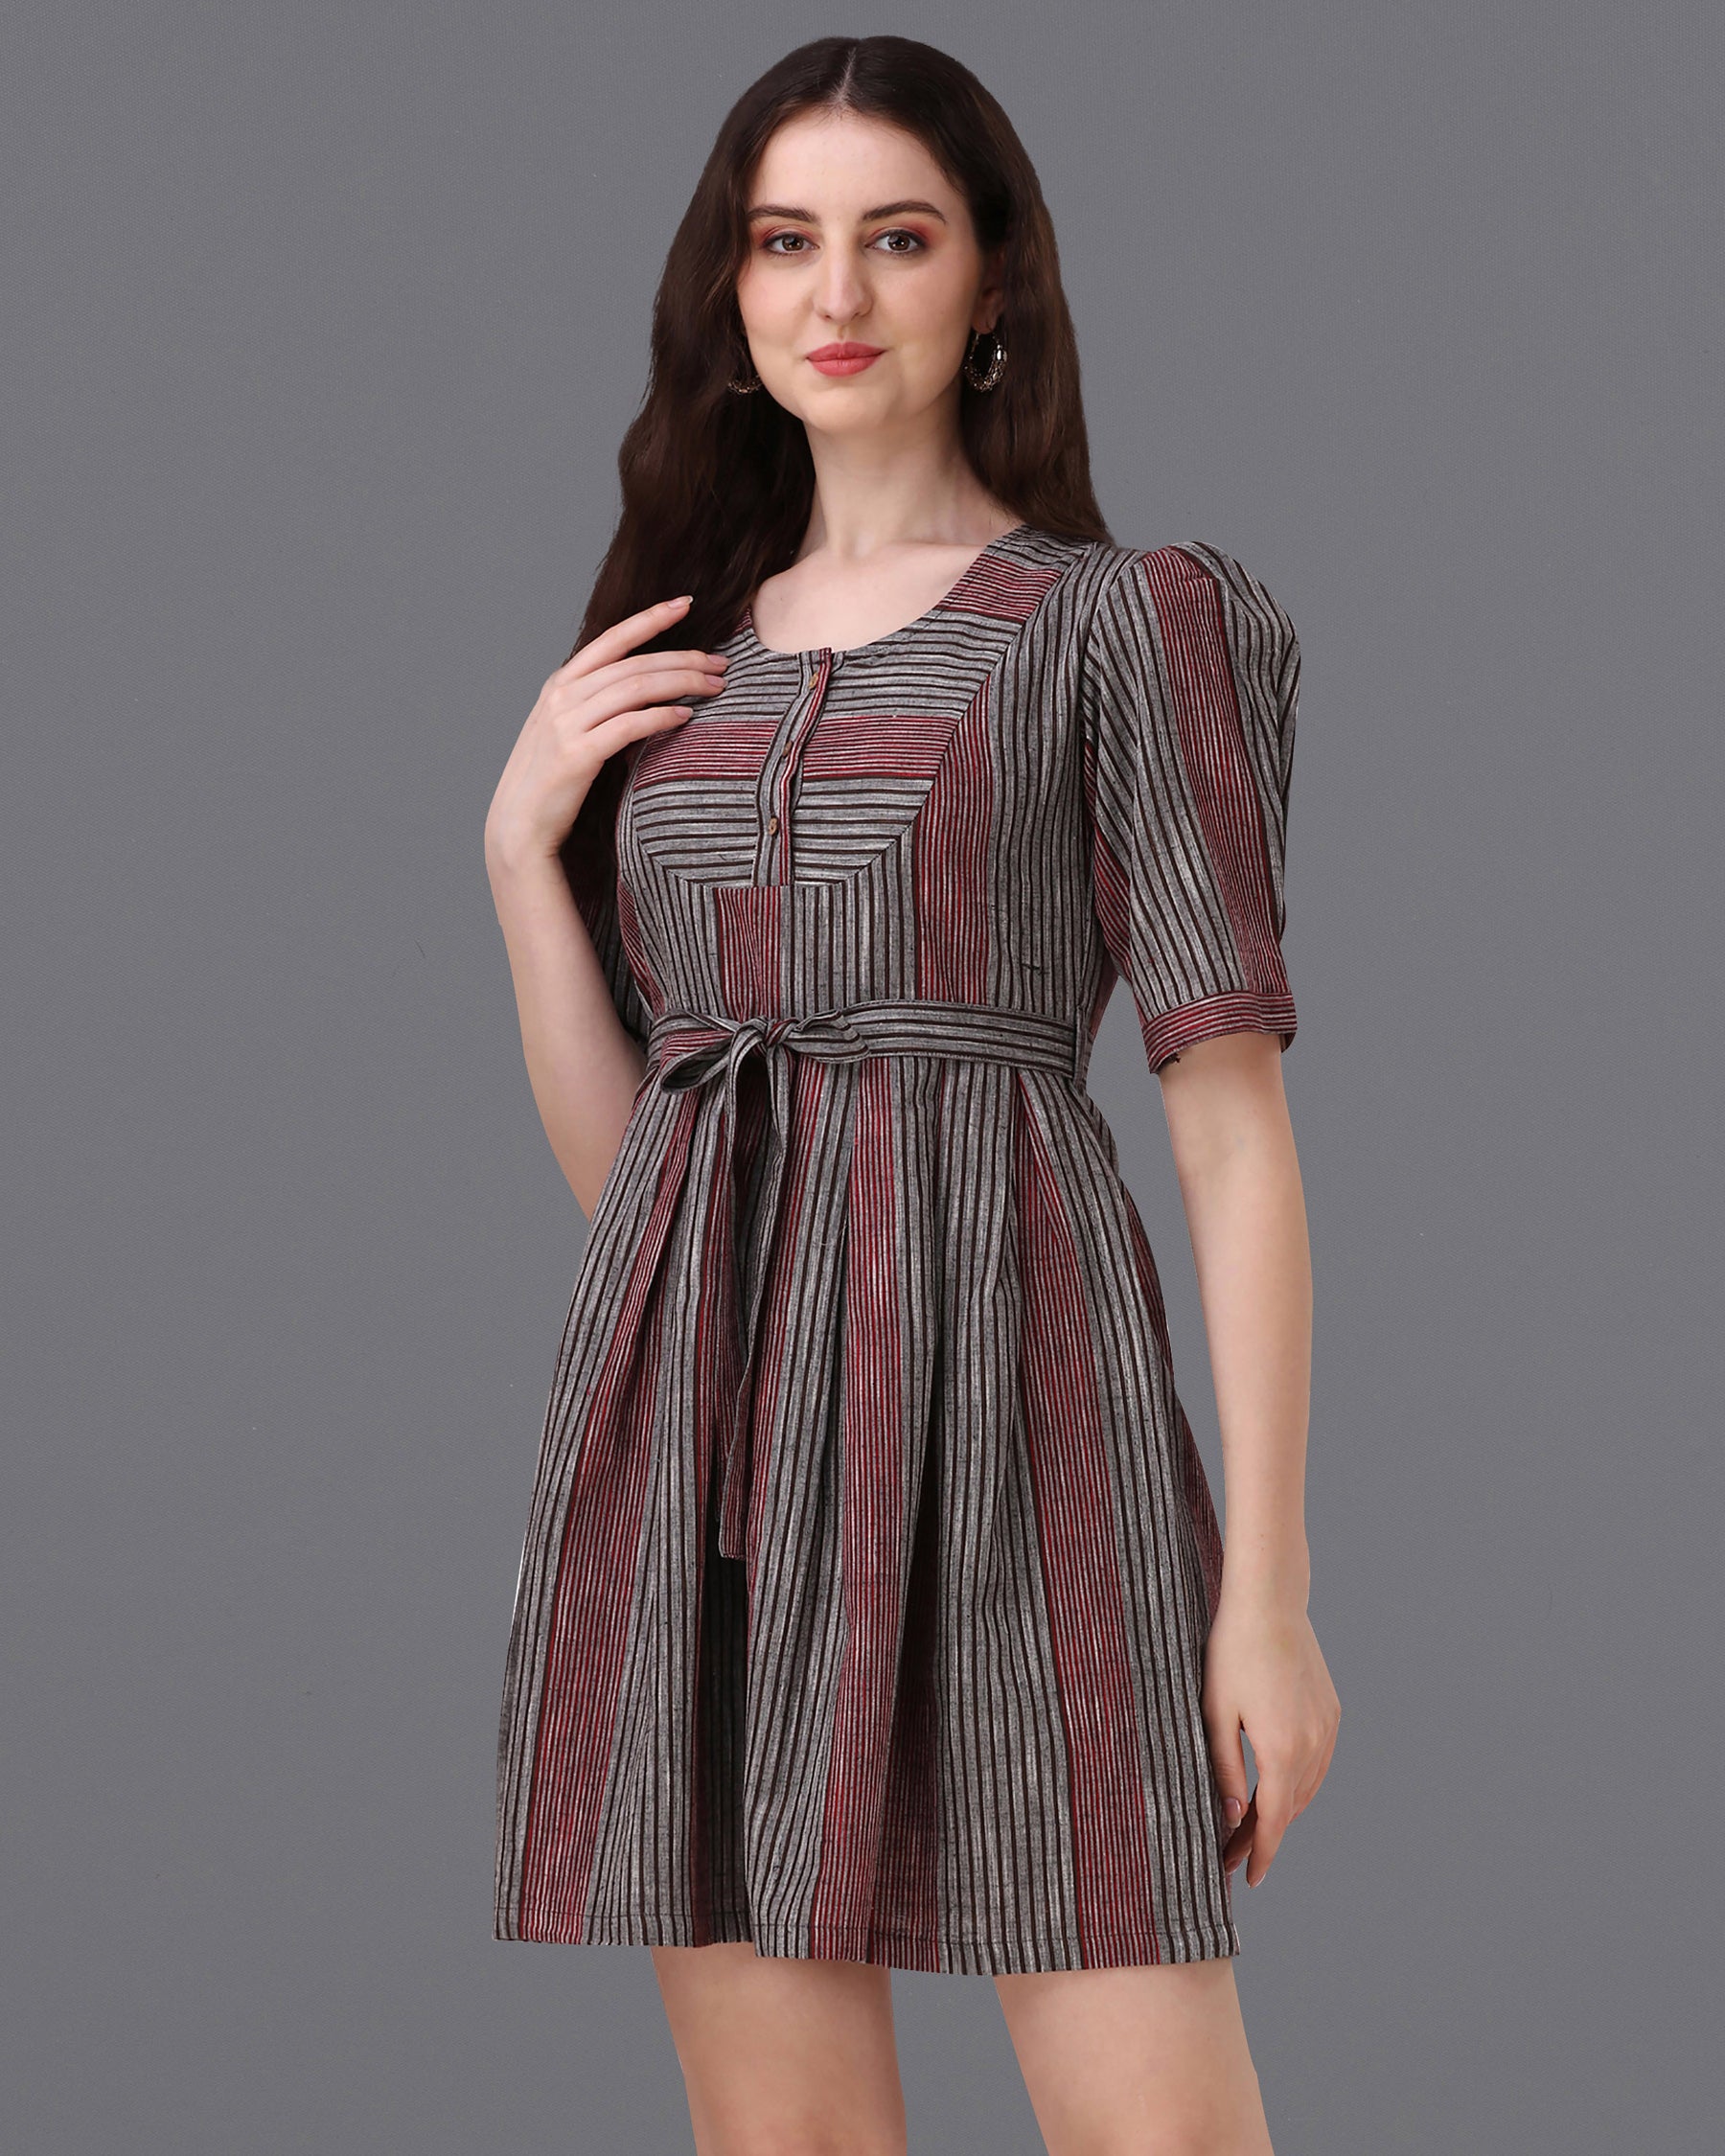 Granite Gray with Moccaccino Red Super Soft Premium Cotton Thigh Length Dress WD035-32, WD035-34, WD035-36, WD035-38, WD035-40, WD035-42